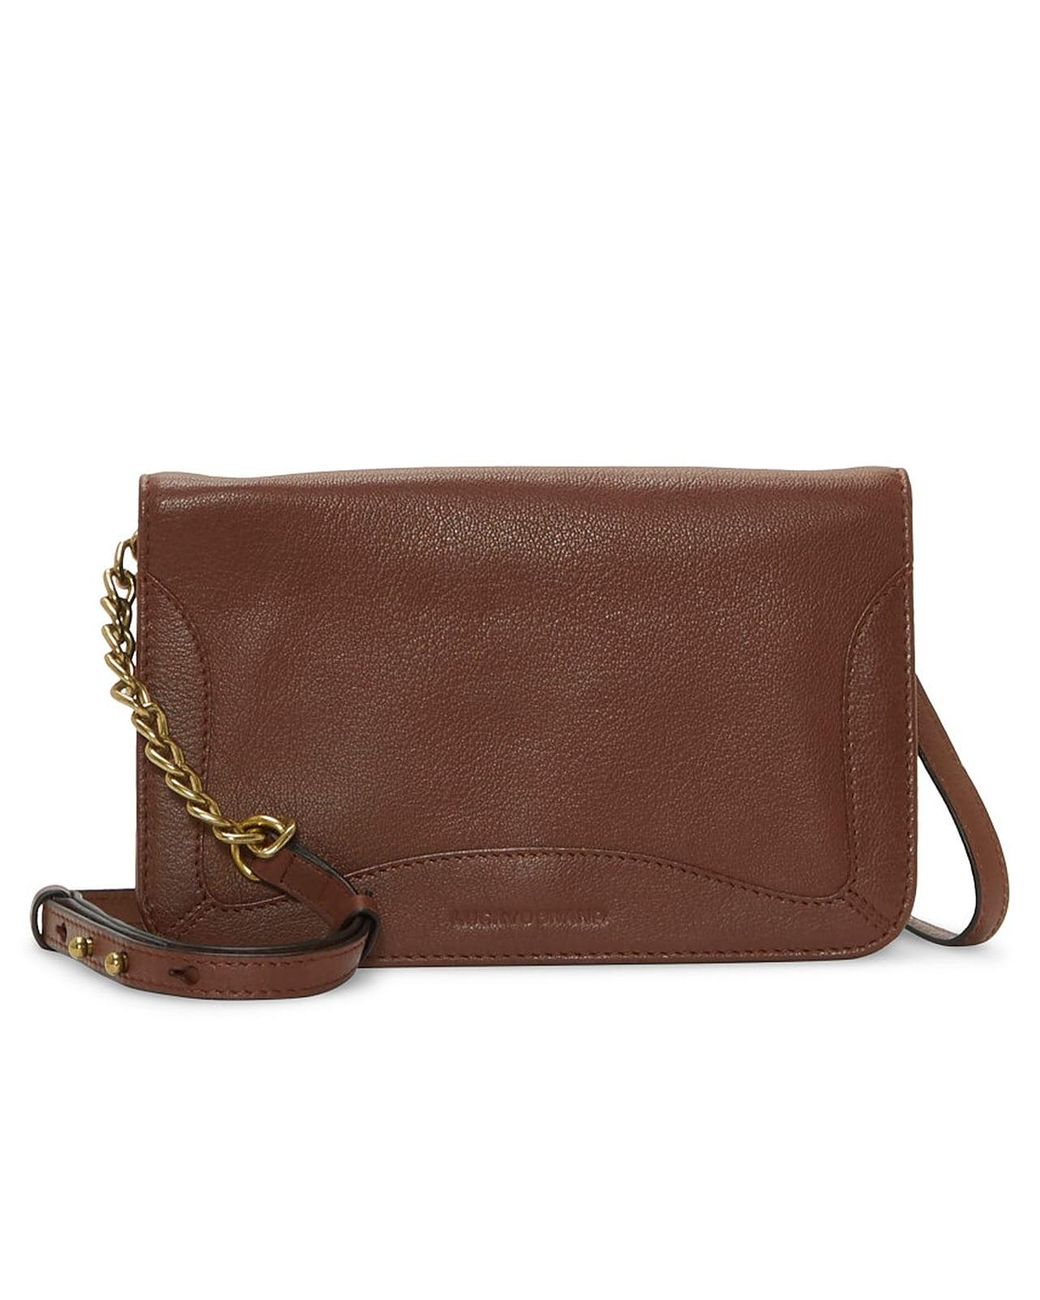 Lucky Brand Naya Leather Crossbody Bag in Brown | Lyst